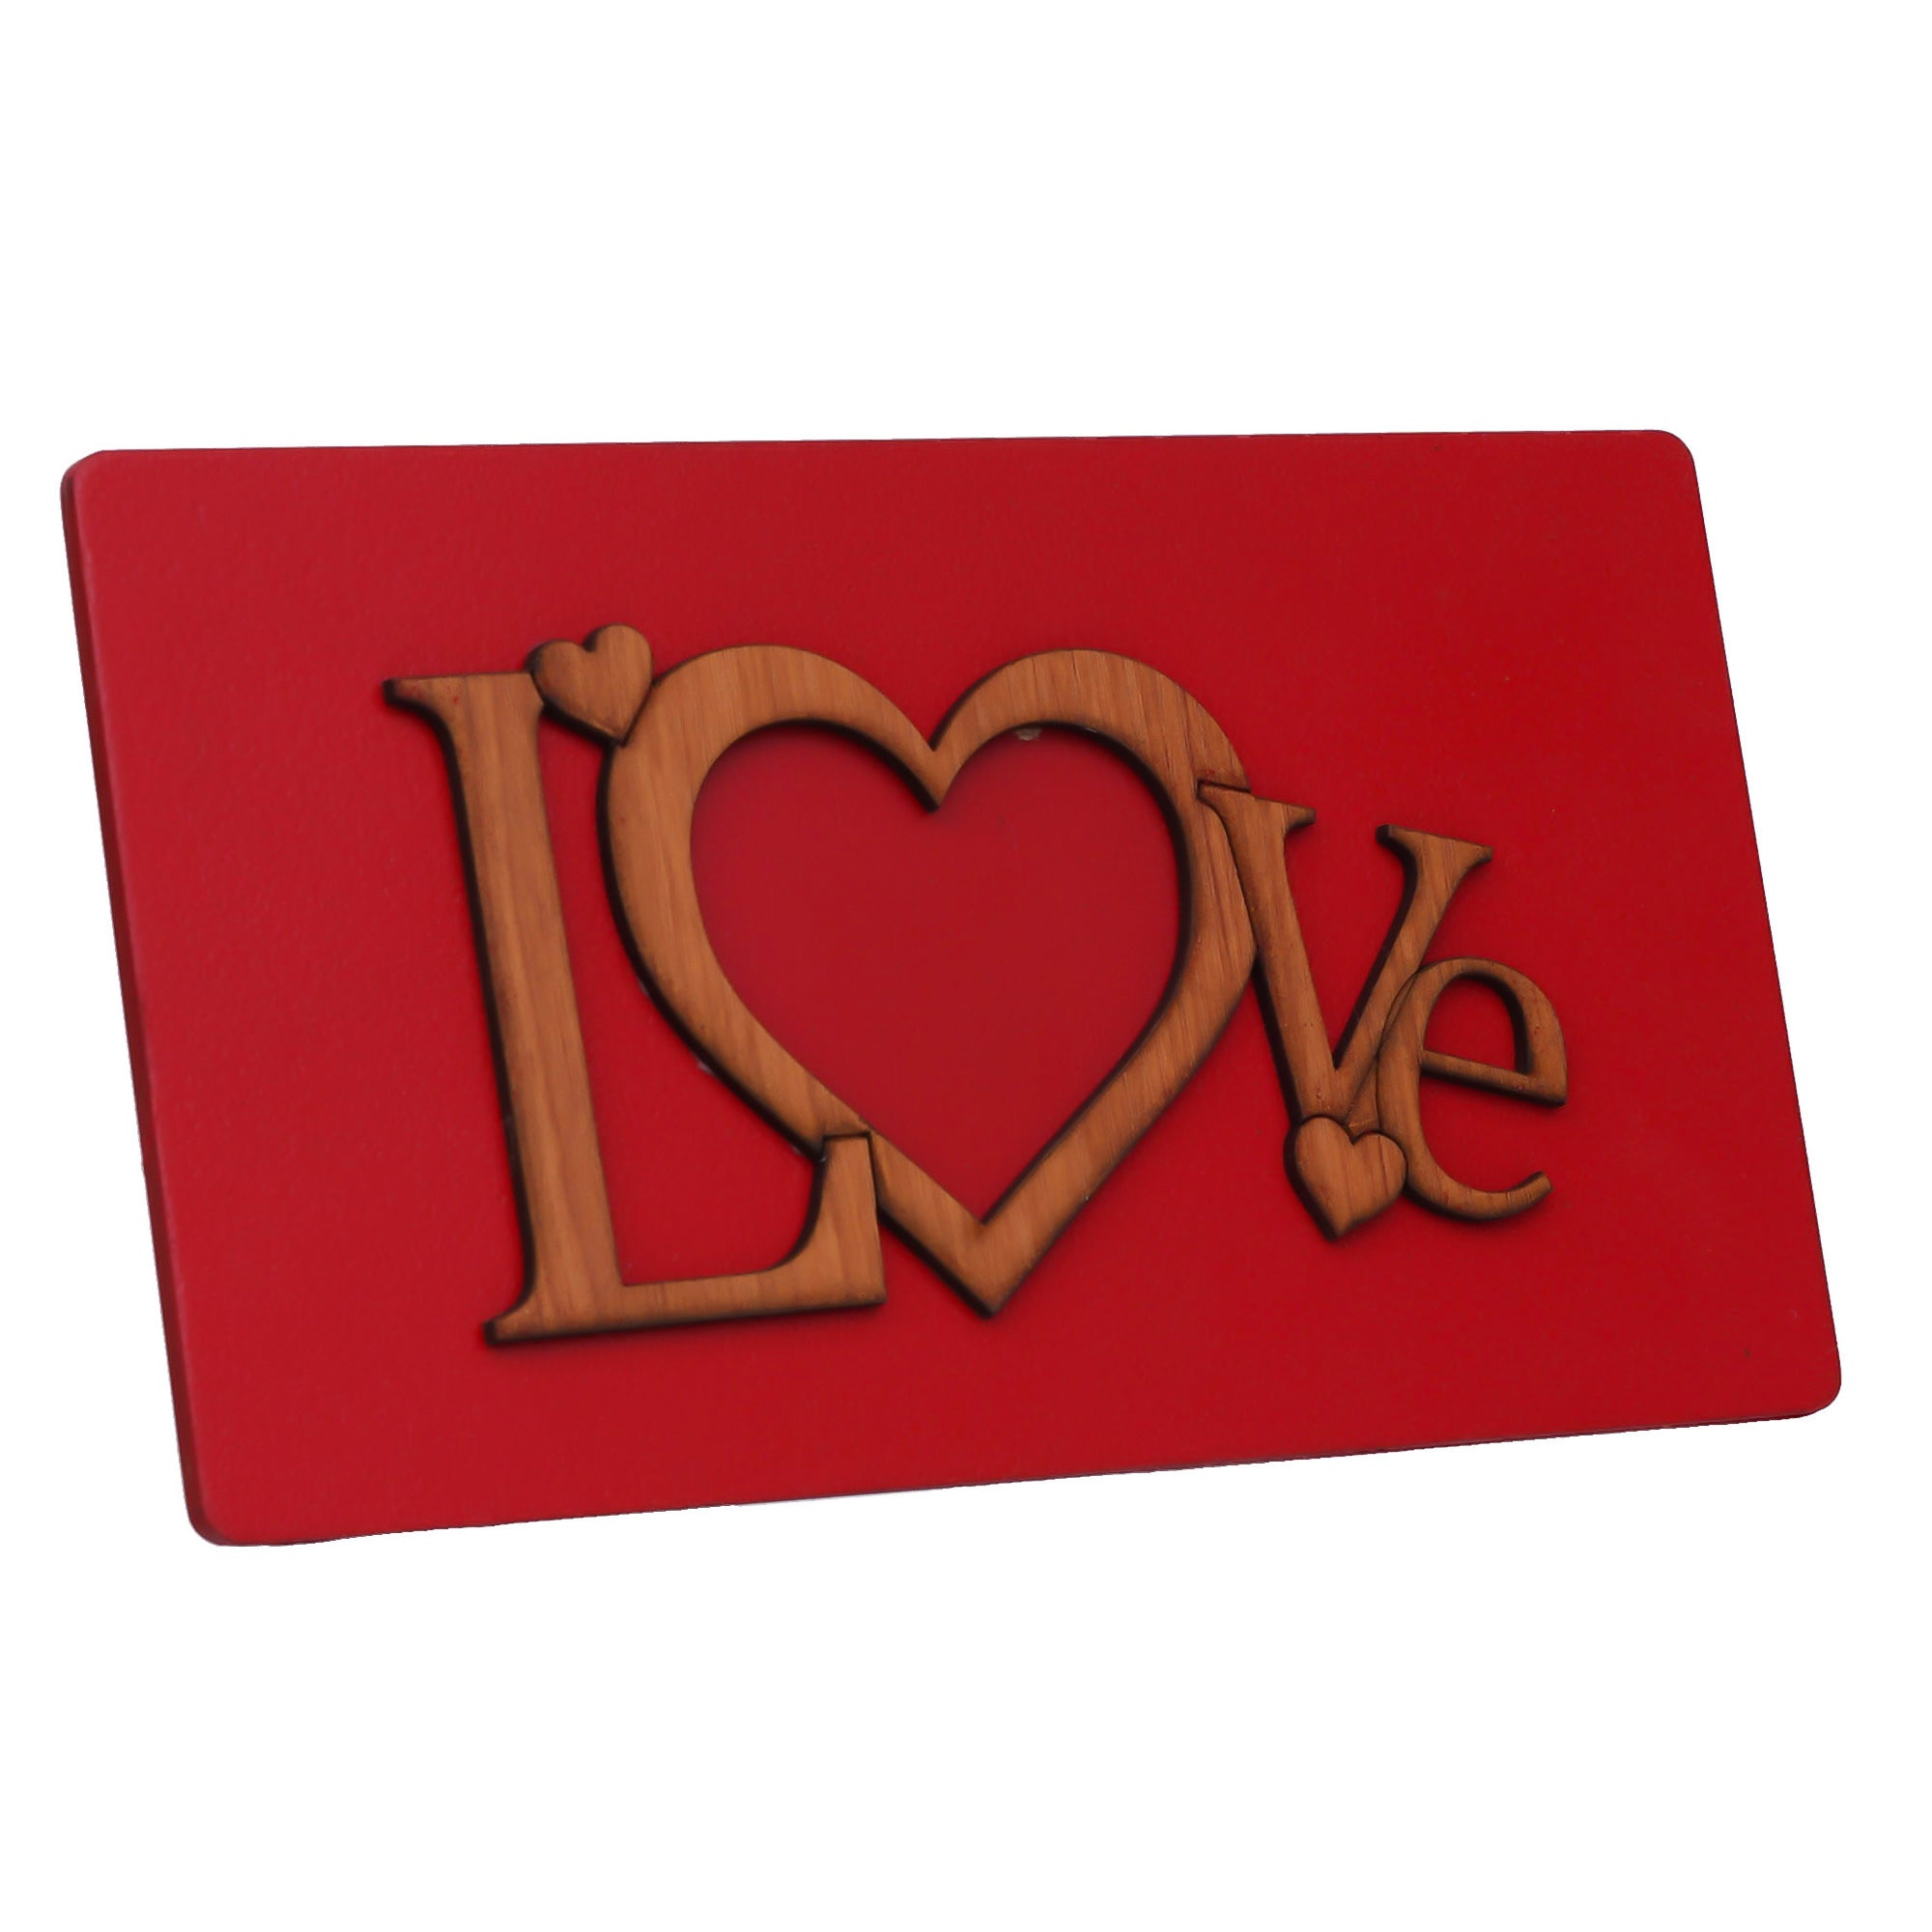 Valentine Combo of "Love" Wooden Photo Frame With Red Stand, Bride Kissing Groom Romantic Polyresin Decorative Showpiece 5